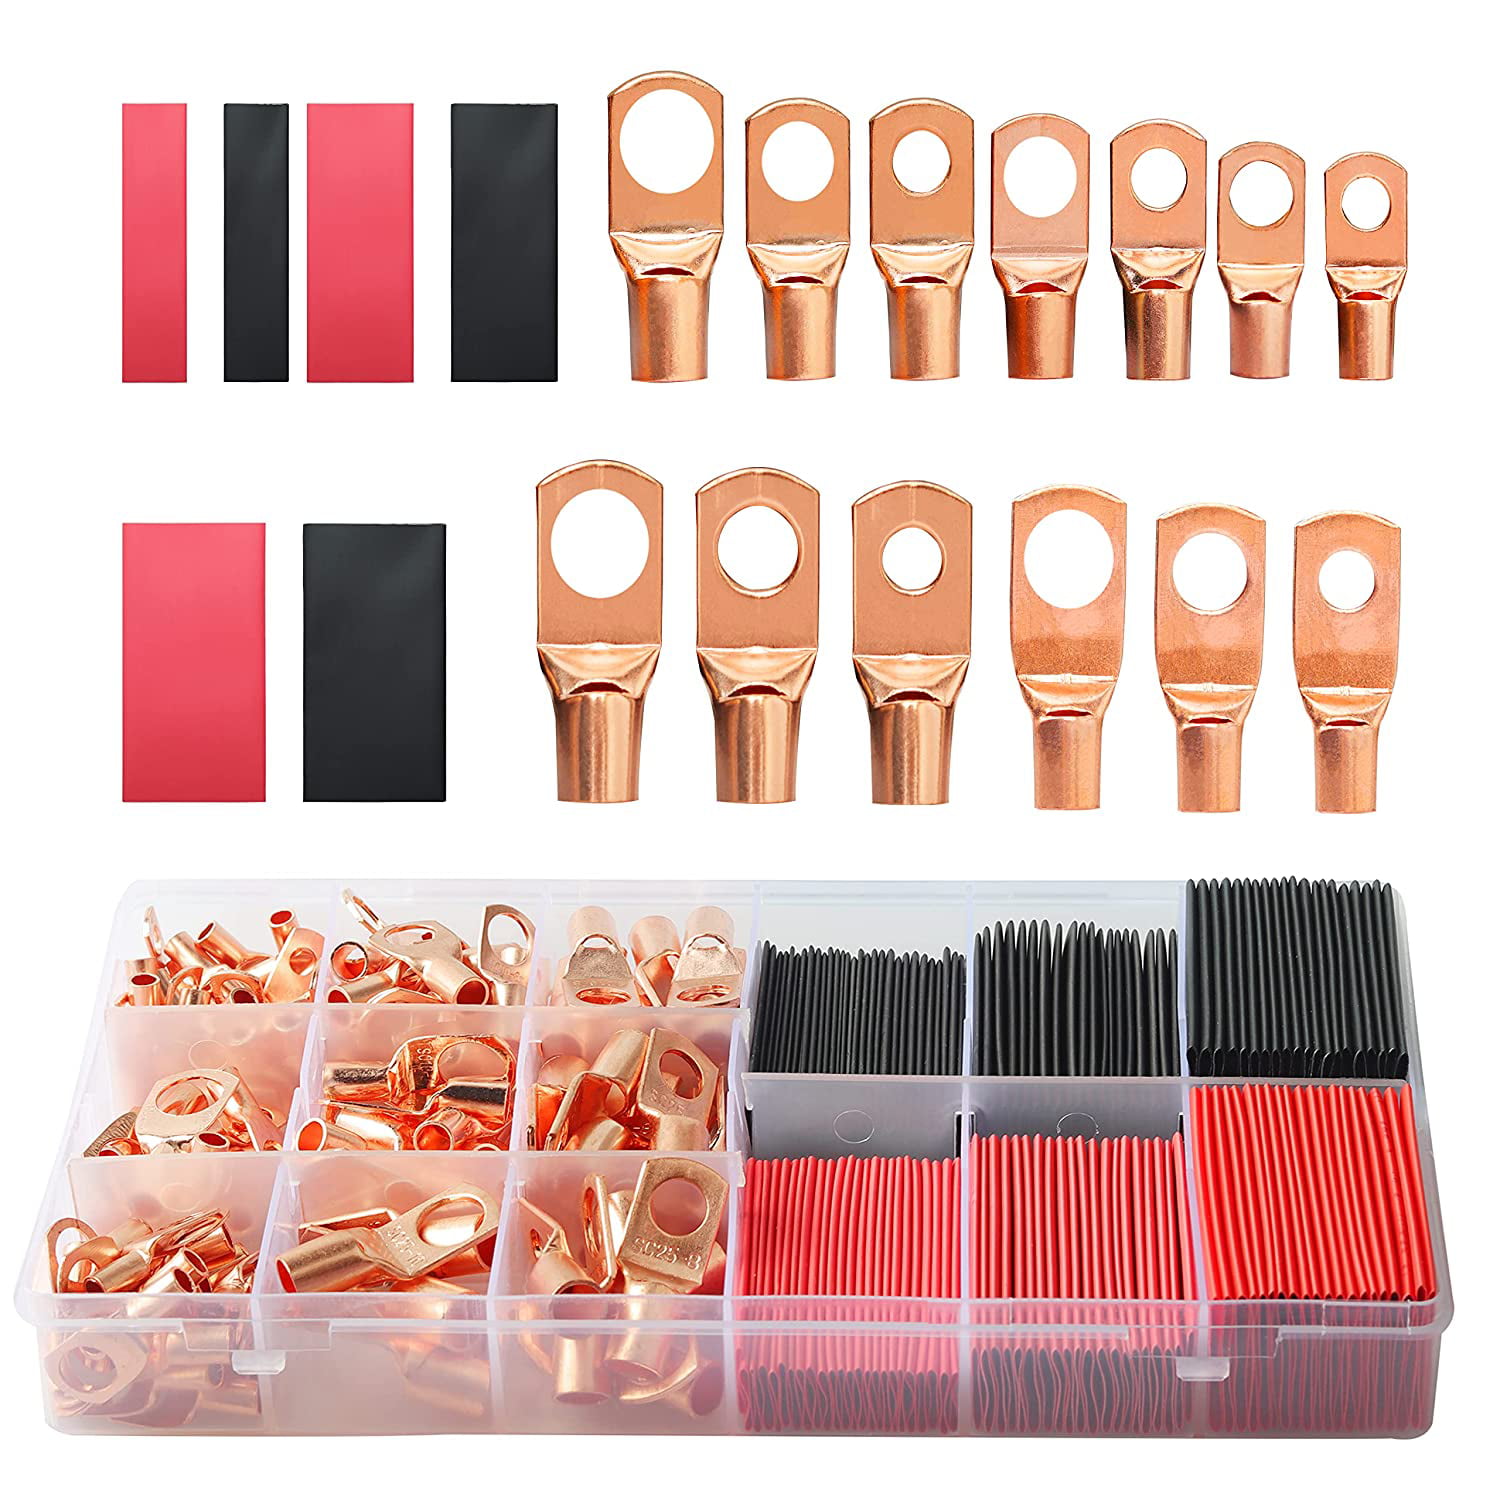 AWG 2 4 6 8 10 12 Ring Lug Kit with Heat Shrink 273Pcs Copper Wire Terminal Connectors IBosins 133pcs Battery Cable Lugs with 140pcs Heat Shrink Tubing 